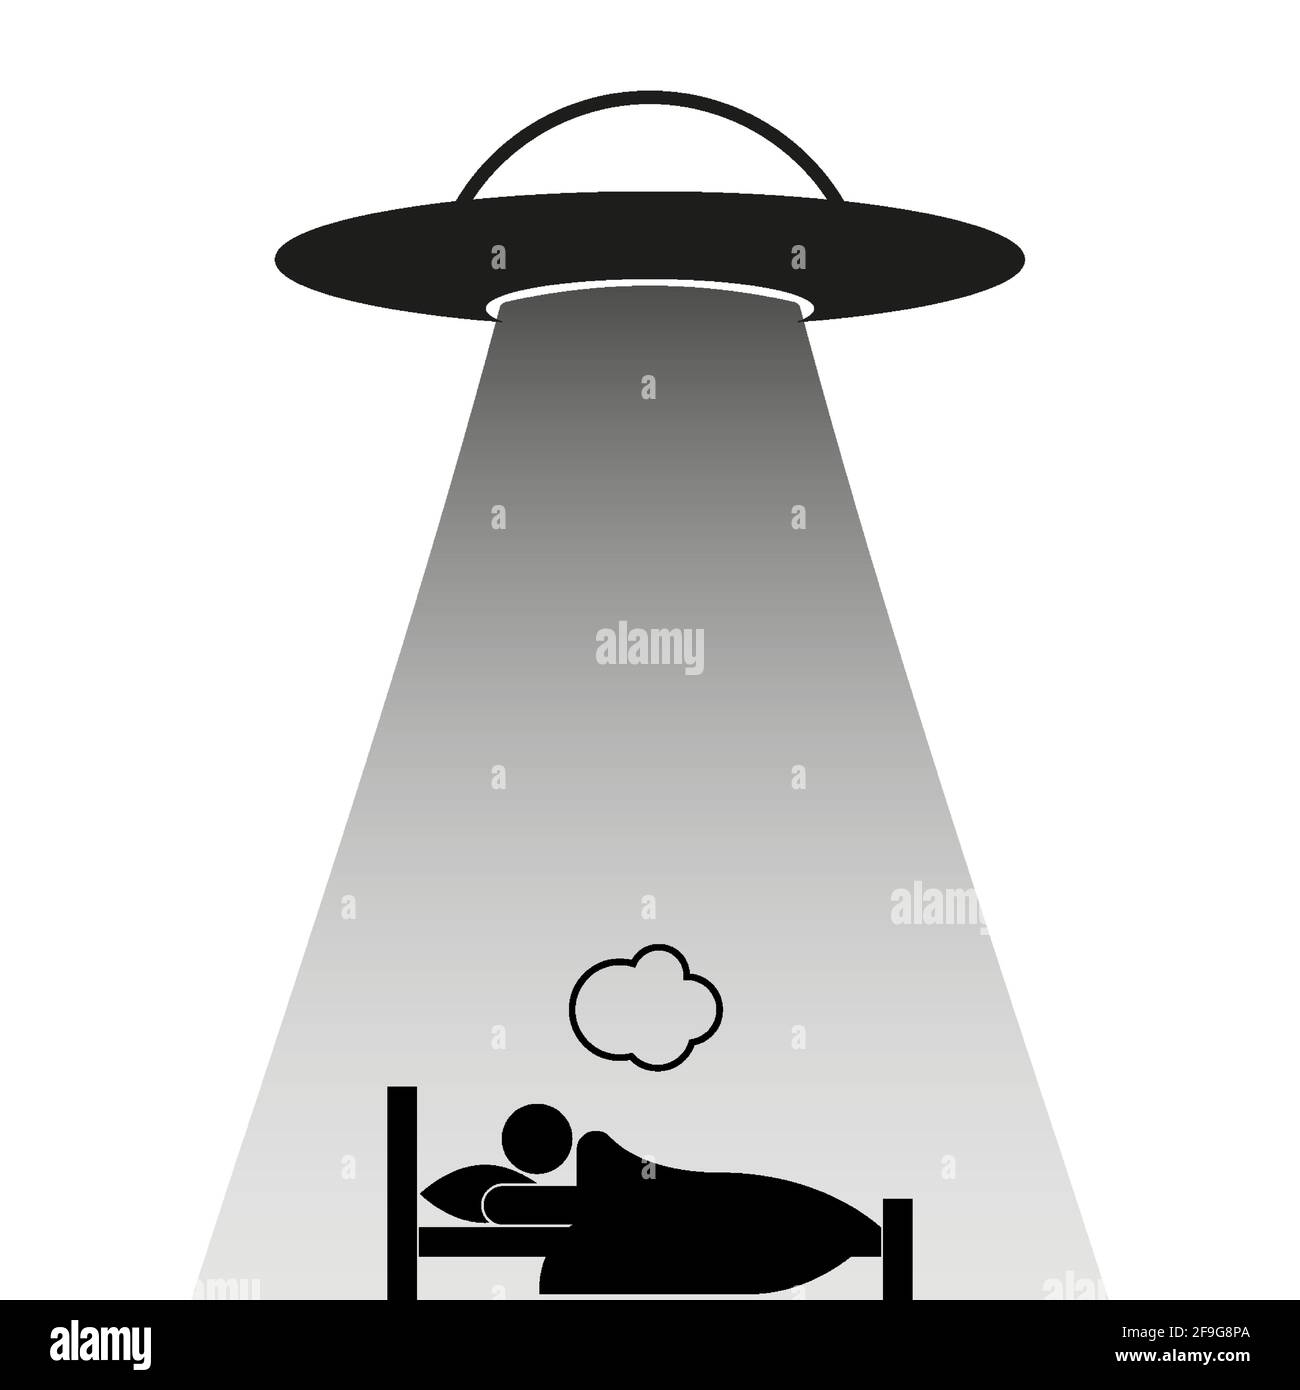 UFO abduction. Flying saucer abducts human. UFO kidnaps the sleeper. Simple icon. Flat vector illustration isolated on white. Stock Vector